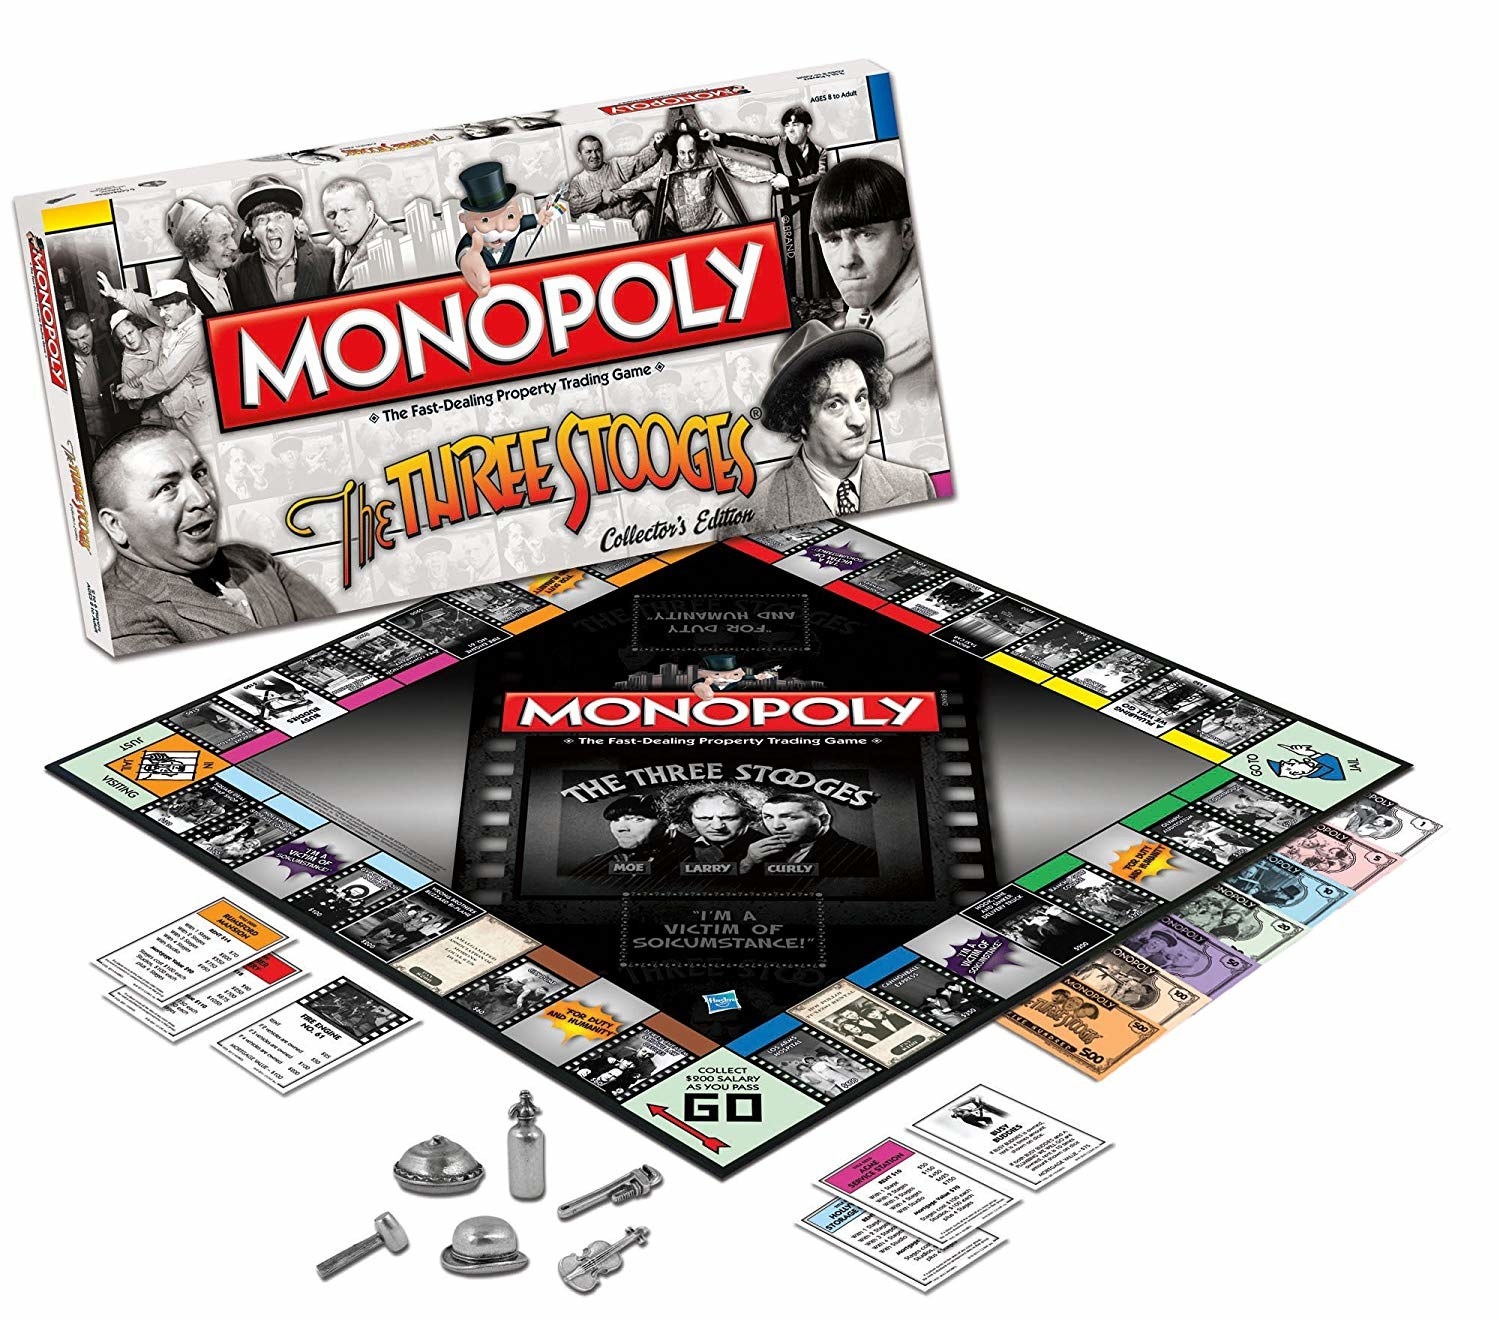 Monopoly Games That Every Pop Culture Fanatic Should Have